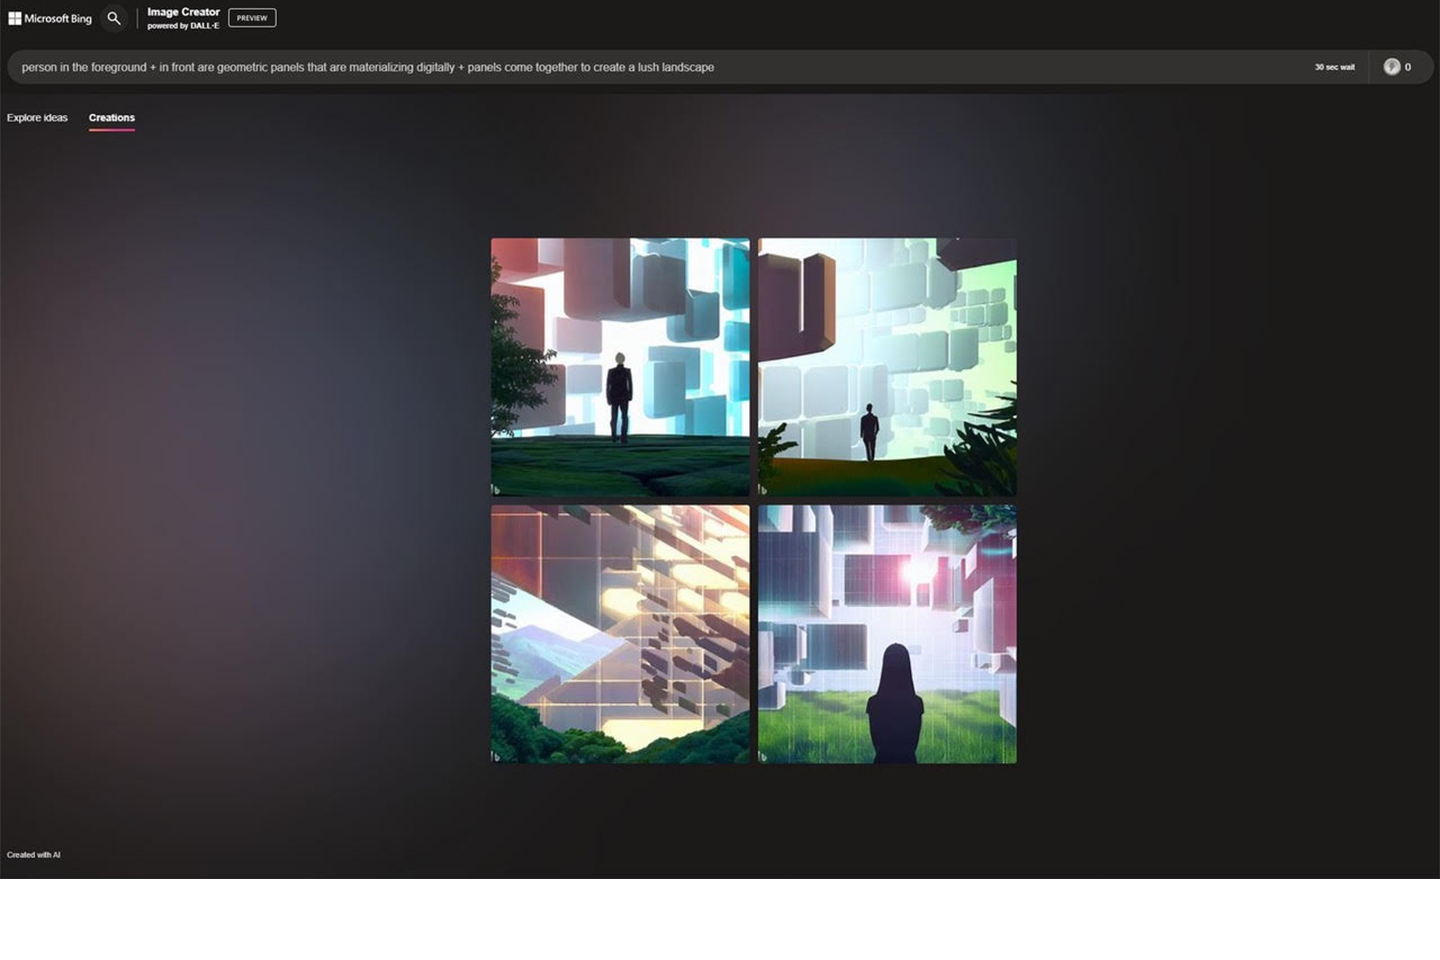 Screenshot of Bing Image Creator with the prompt 'Person in the foreground + in front are geometric panels that are materializing digitally + panels come together to create a lush landscape'